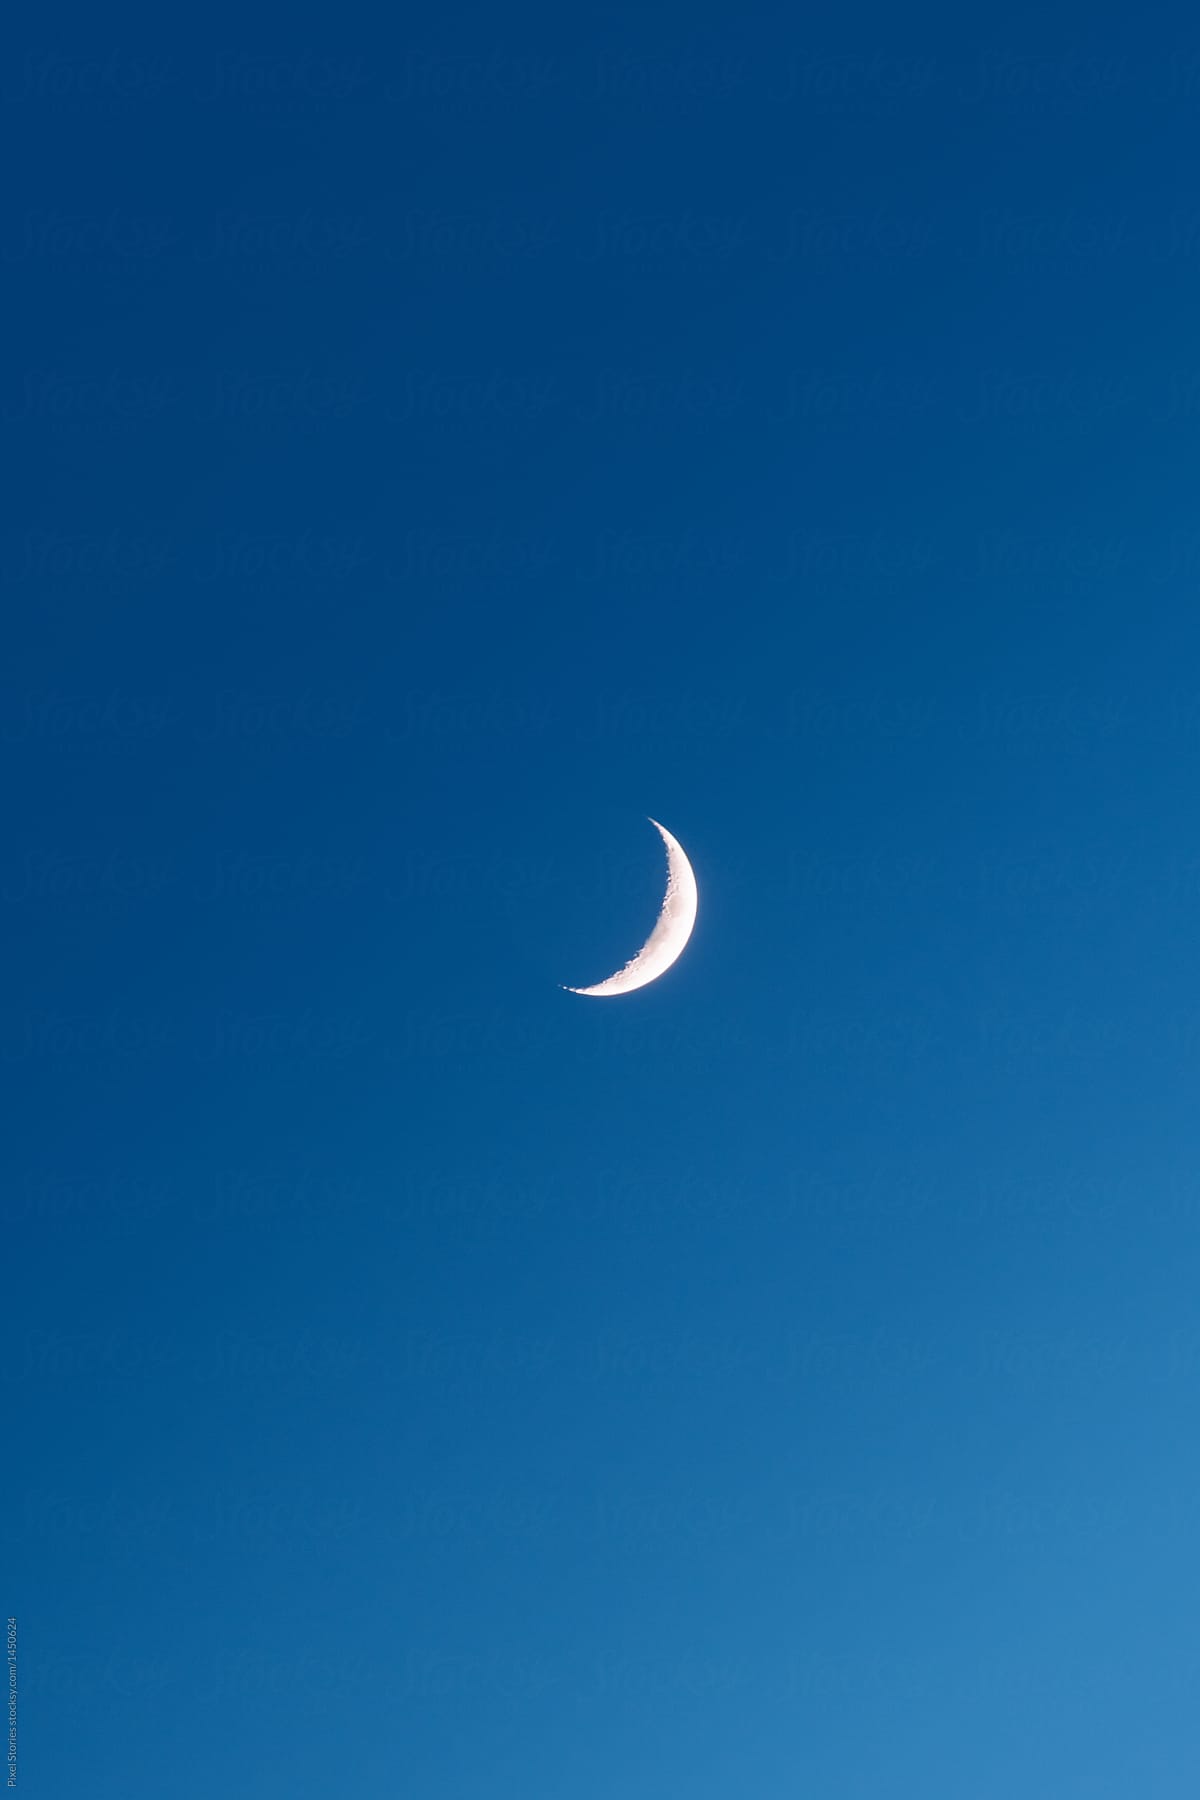 Crescent moon on a clear night